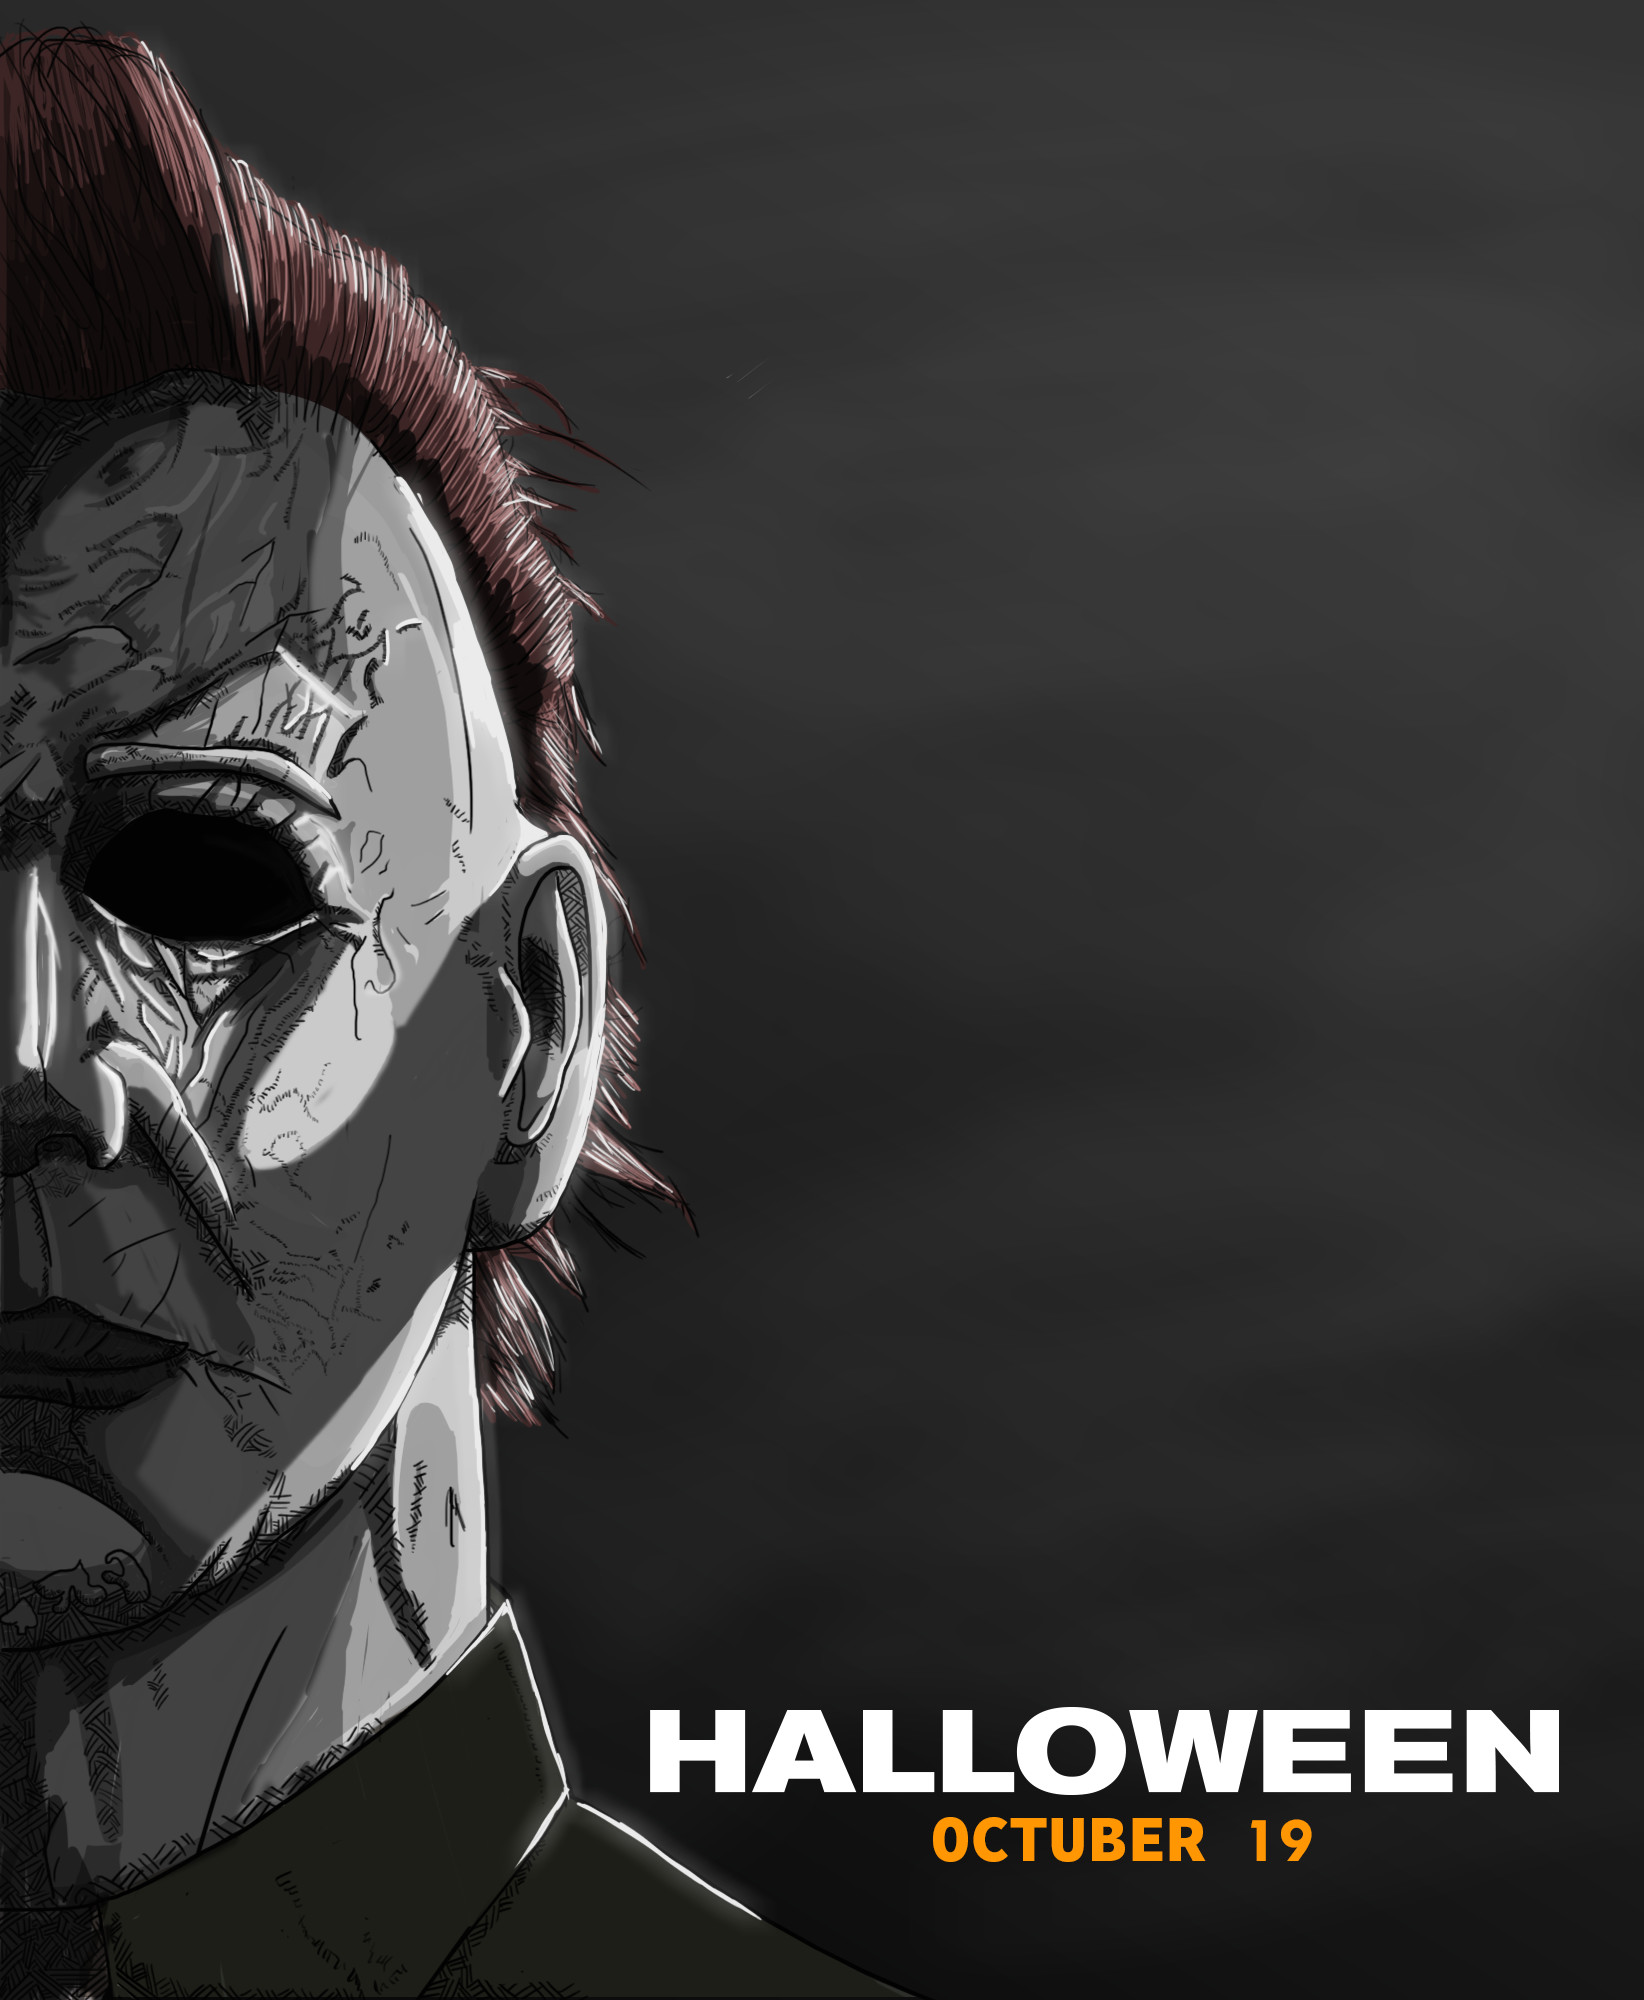 MICHAEL MYERS ANIMATED  THE Blackest PART 4  YouTube